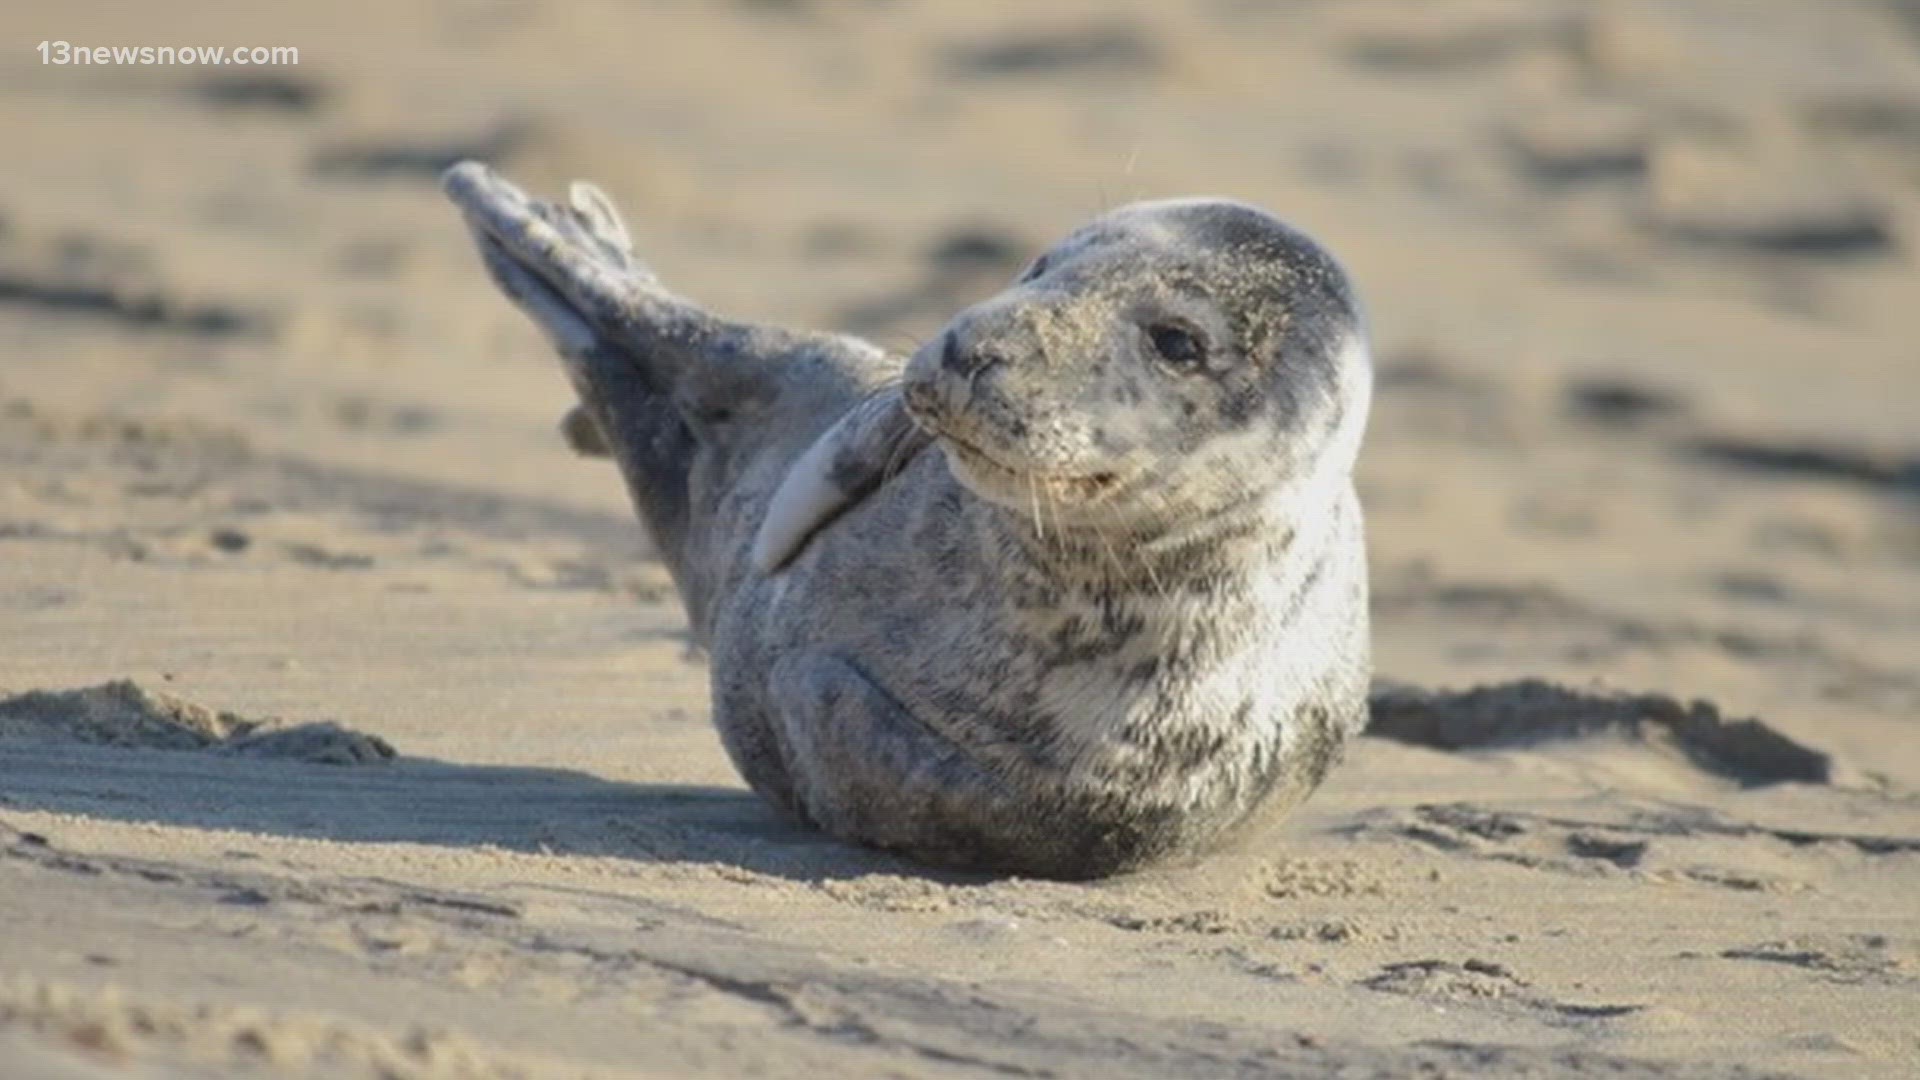 Don't worry, the seal pup was okay! He was just enjoying a rest away from strength of the waves and basking in the sun.